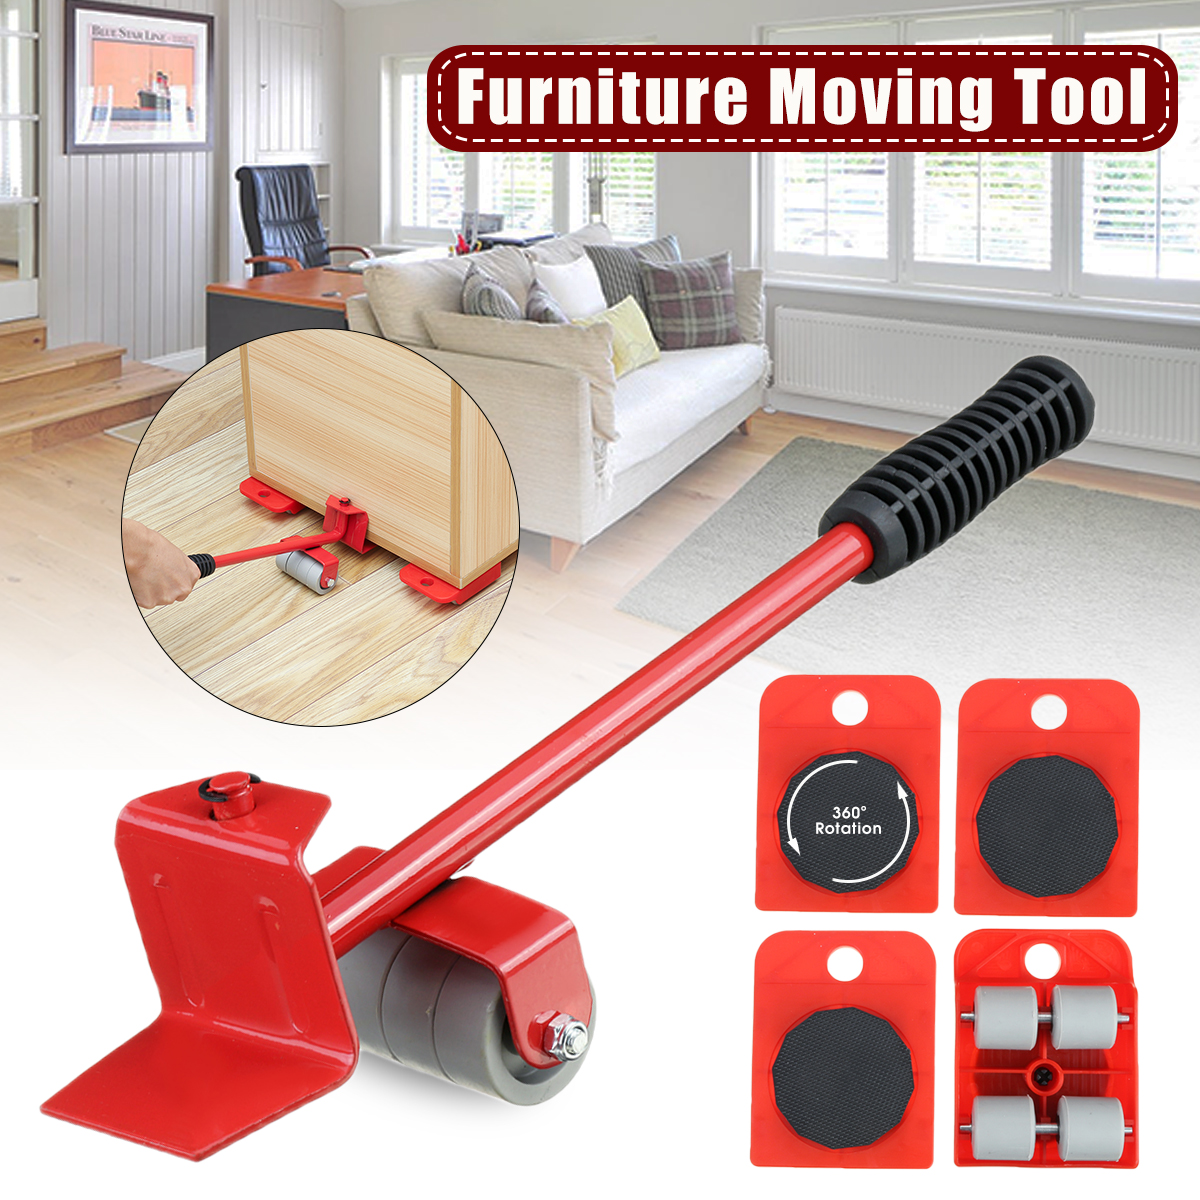 5Pcs-Red-Furniture-Mover-Heavy-Duty-Lifter-Mover-Transport-Set-Furniture-Roller-Tool-1635325-1